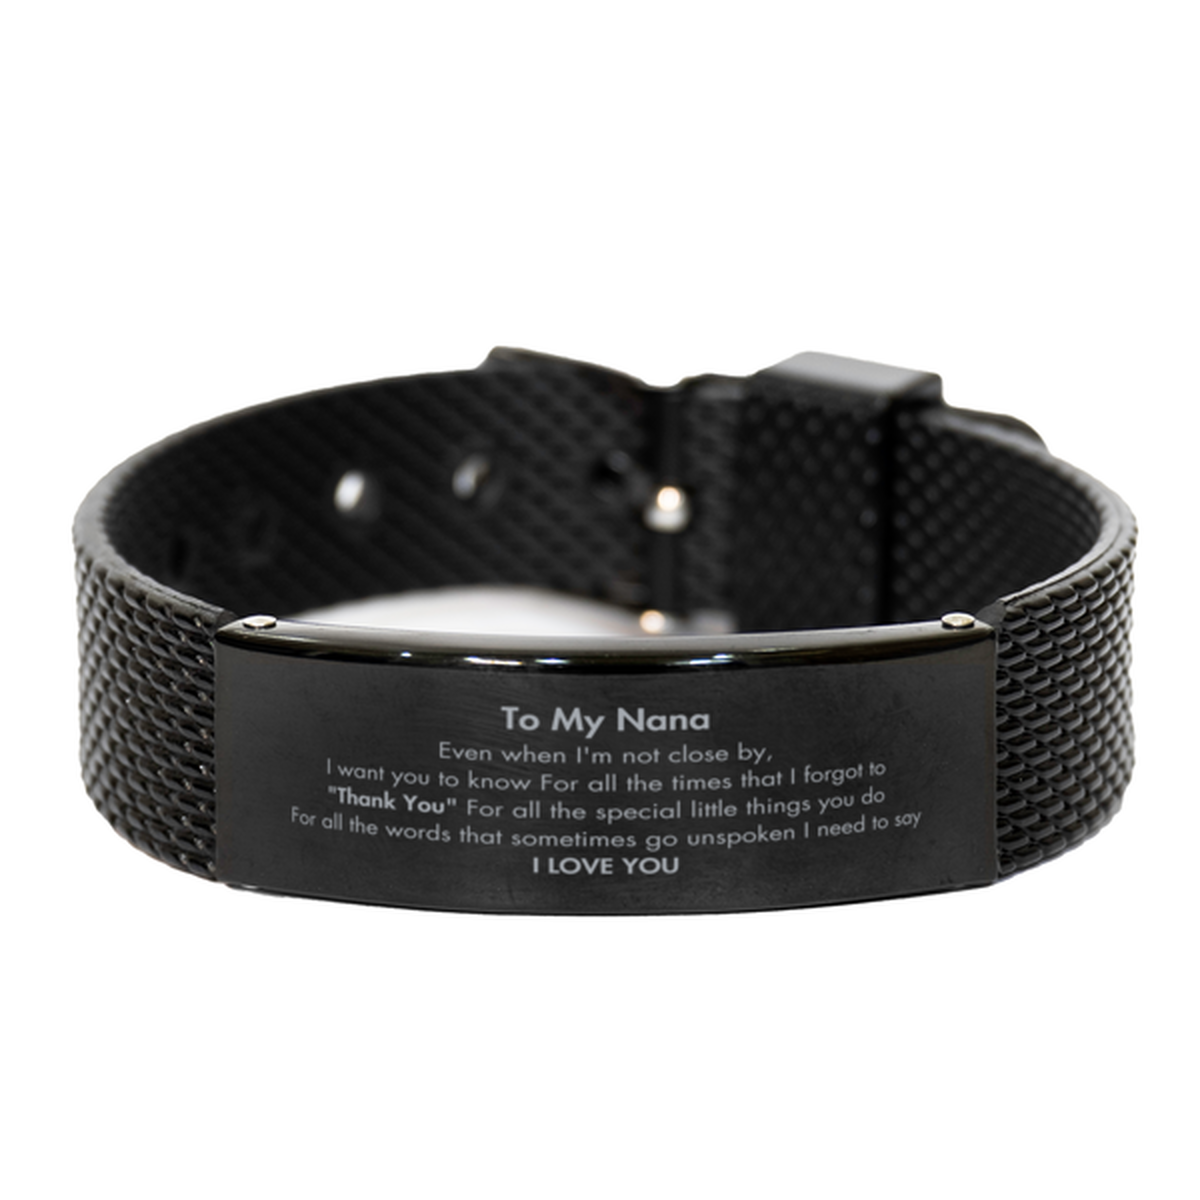 Thank You Gifts for Nana, Keepsake Black Shark Mesh Bracelet Gifts for Nana Birthday Mother's day Father's Day Nana For all the words That sometimes go unspoken I need to say I LOVE YOU